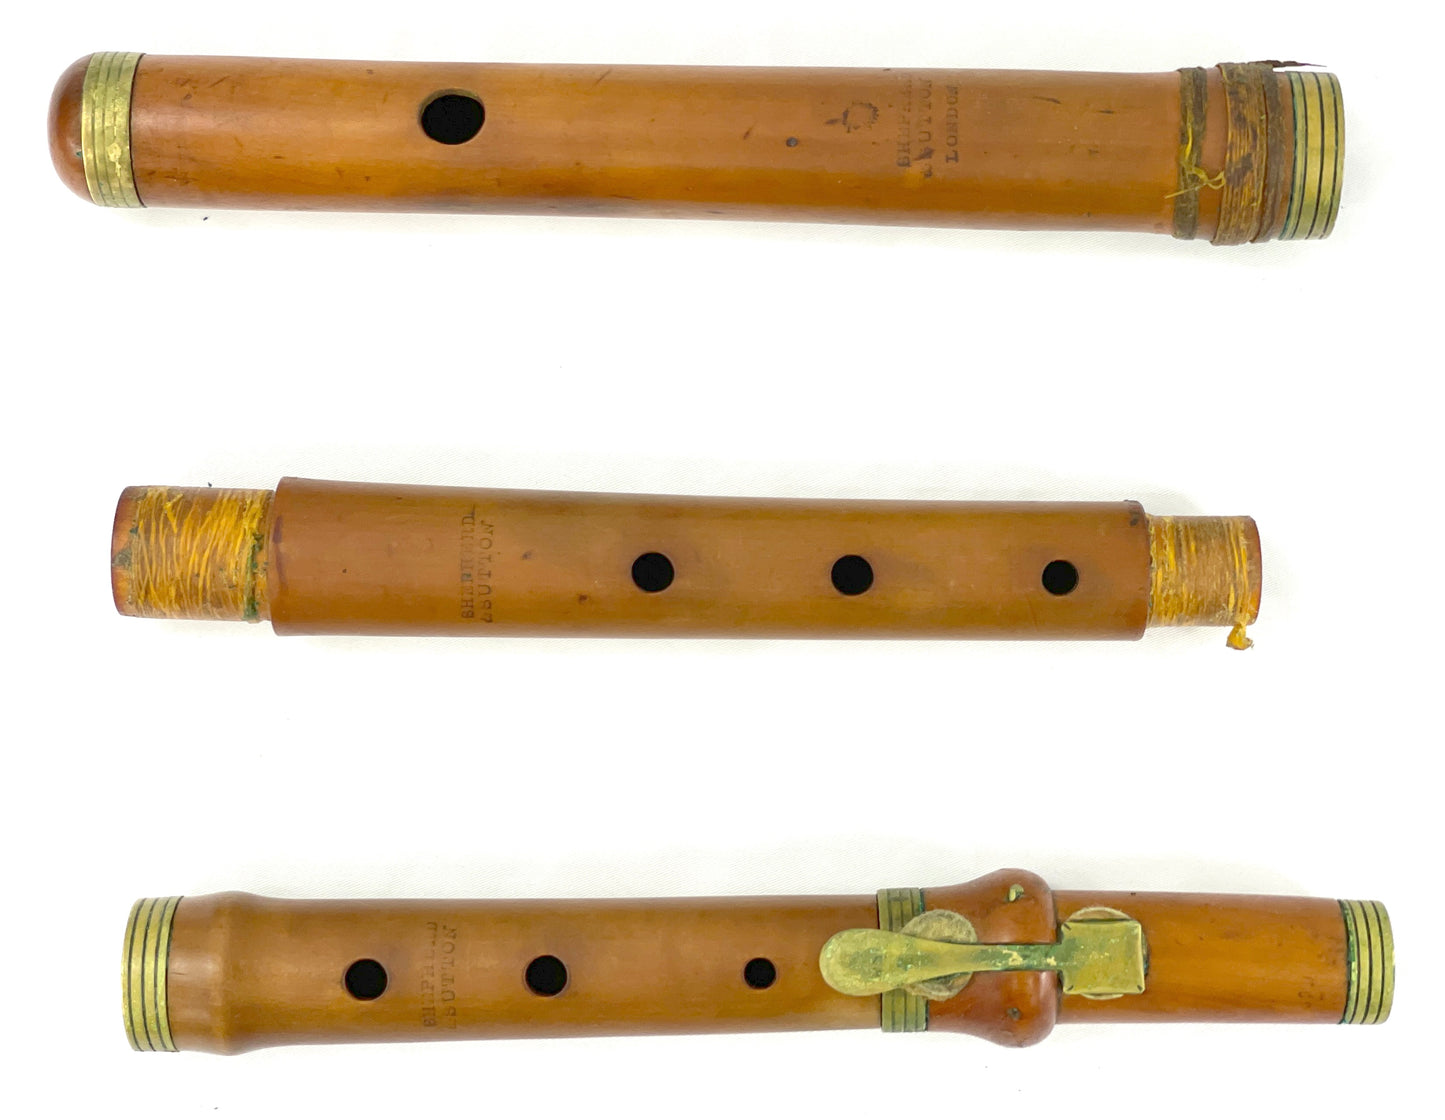 Shepard & Sutton Flute, London, 1 key, Boxwood and brass. 1830-32 Flutes Lark in the Morning   